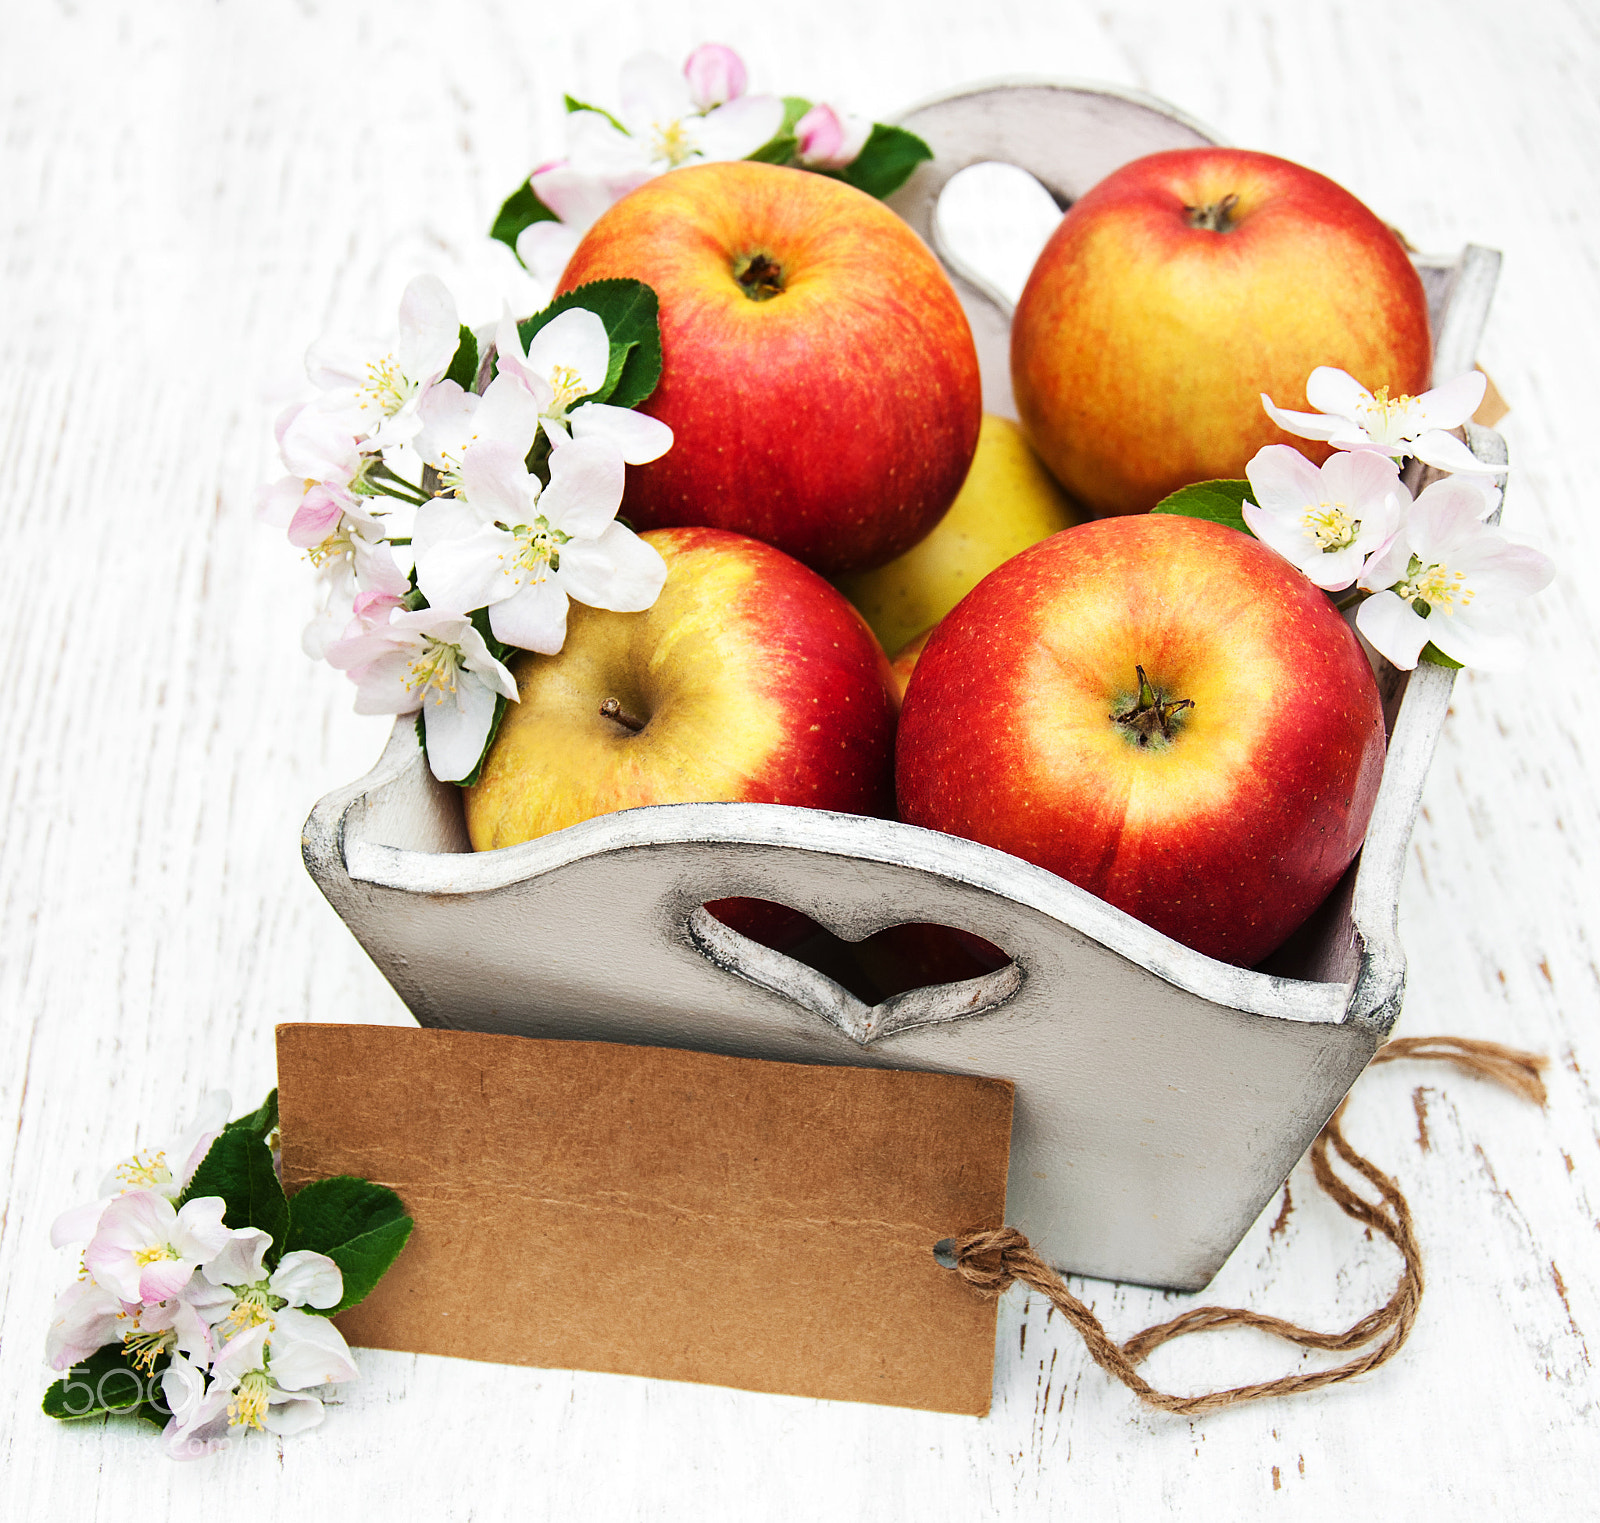 Nikon D90 sample photo. Box with apples and photography